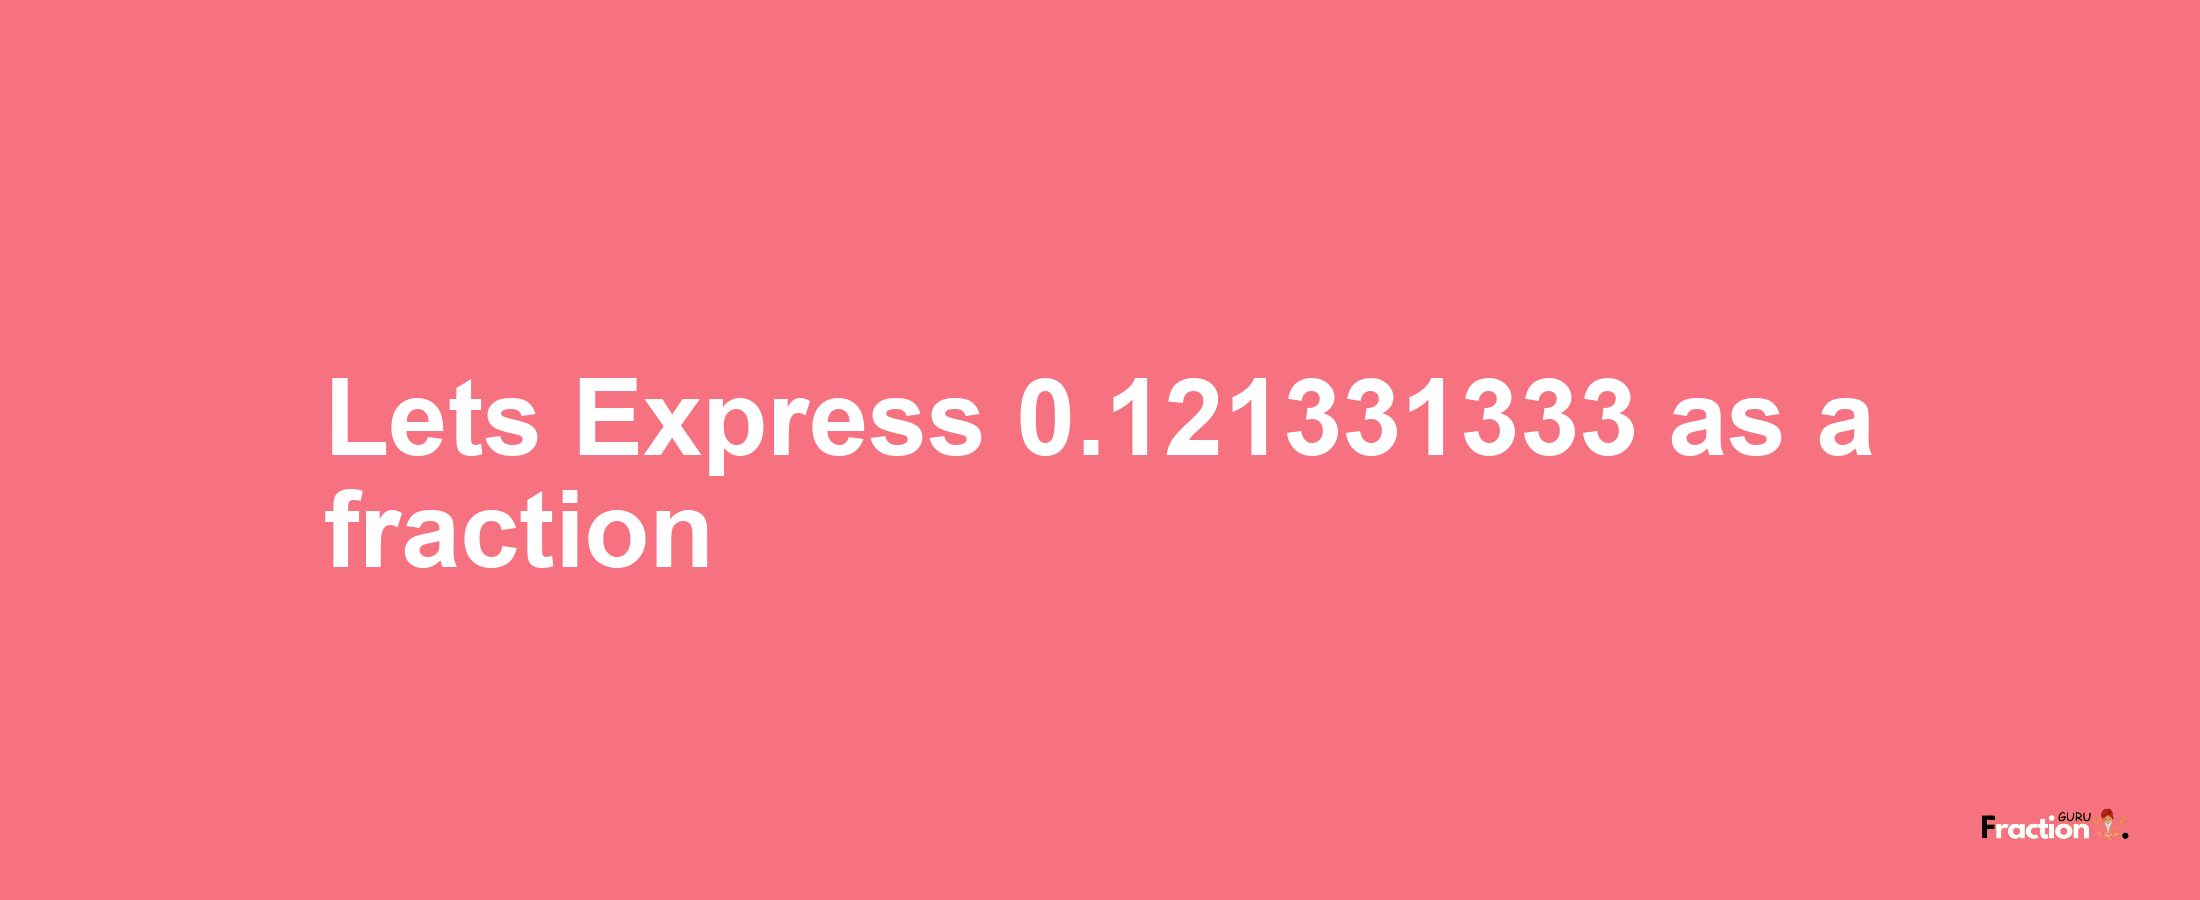 Lets Express 0.121331333 as afraction